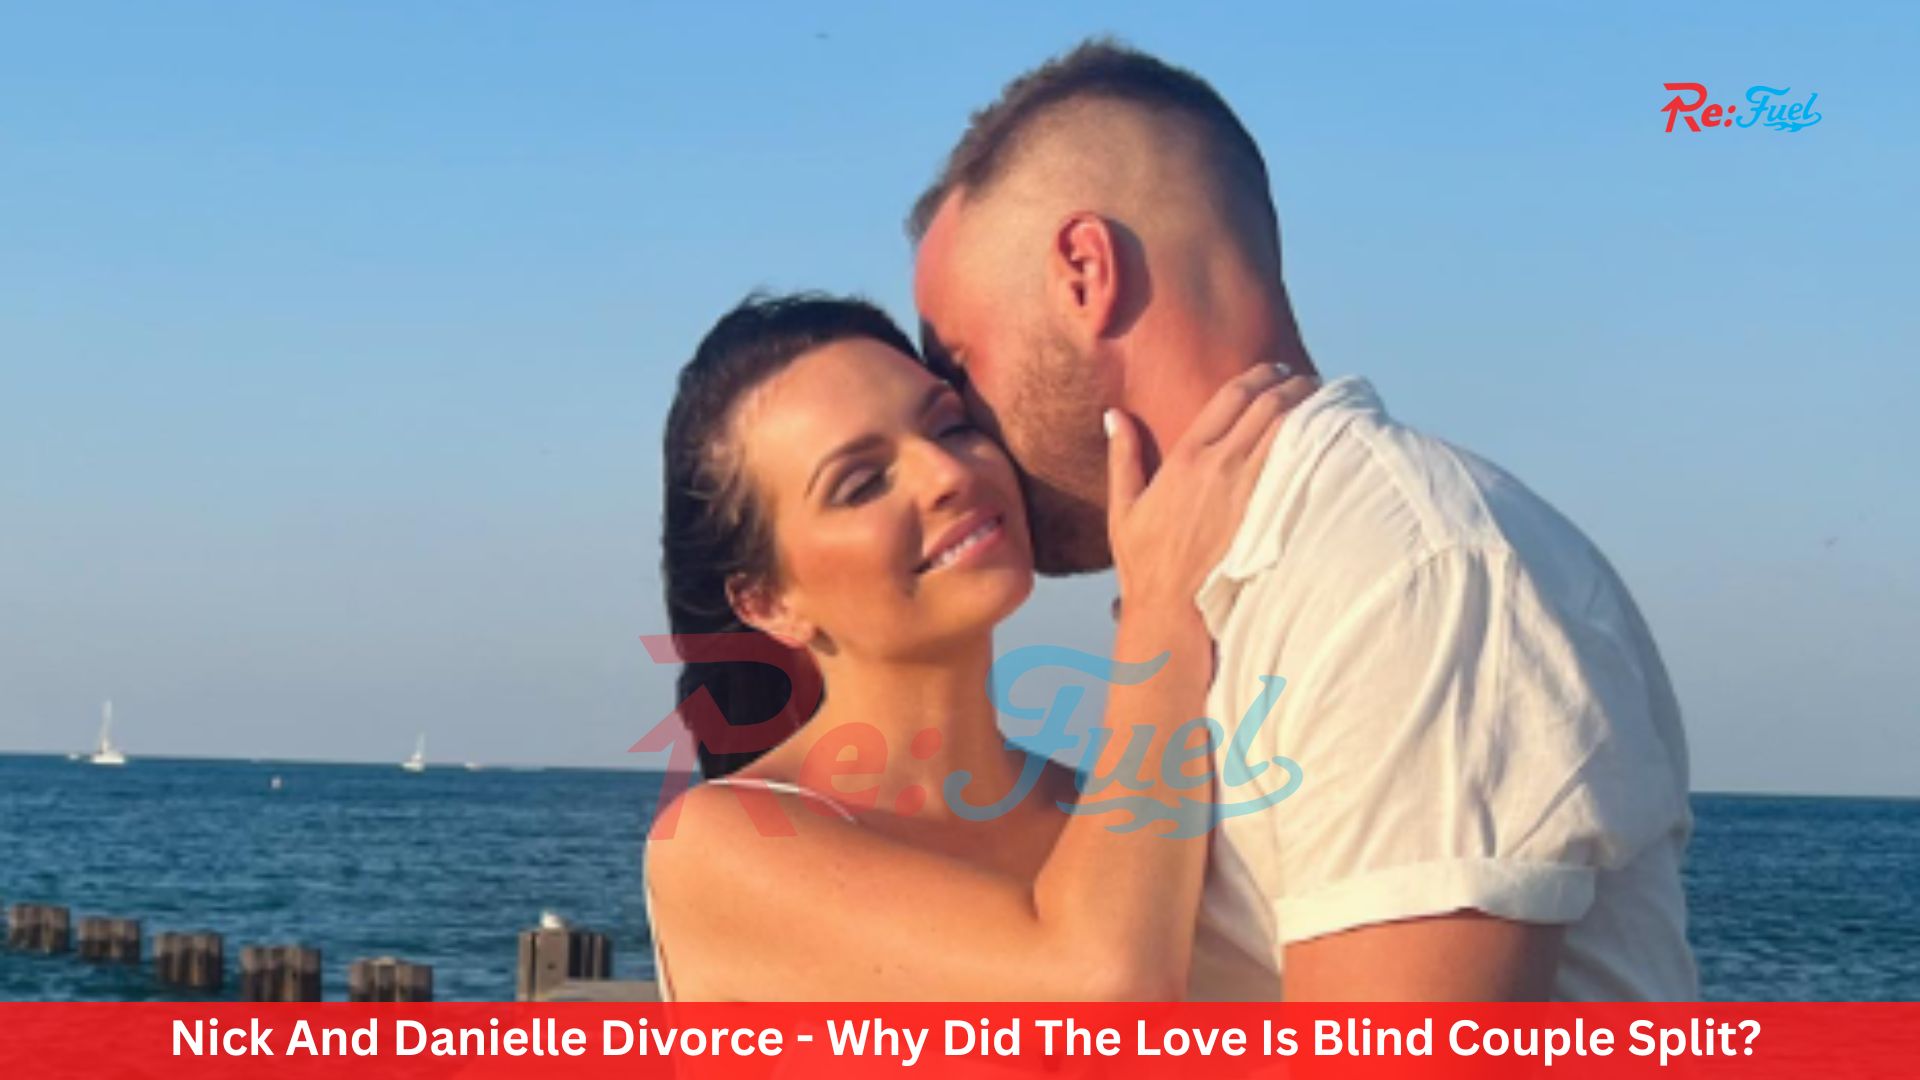 Nick And Danielle Divorce - Why Did The Love Is Blind Couple Split?